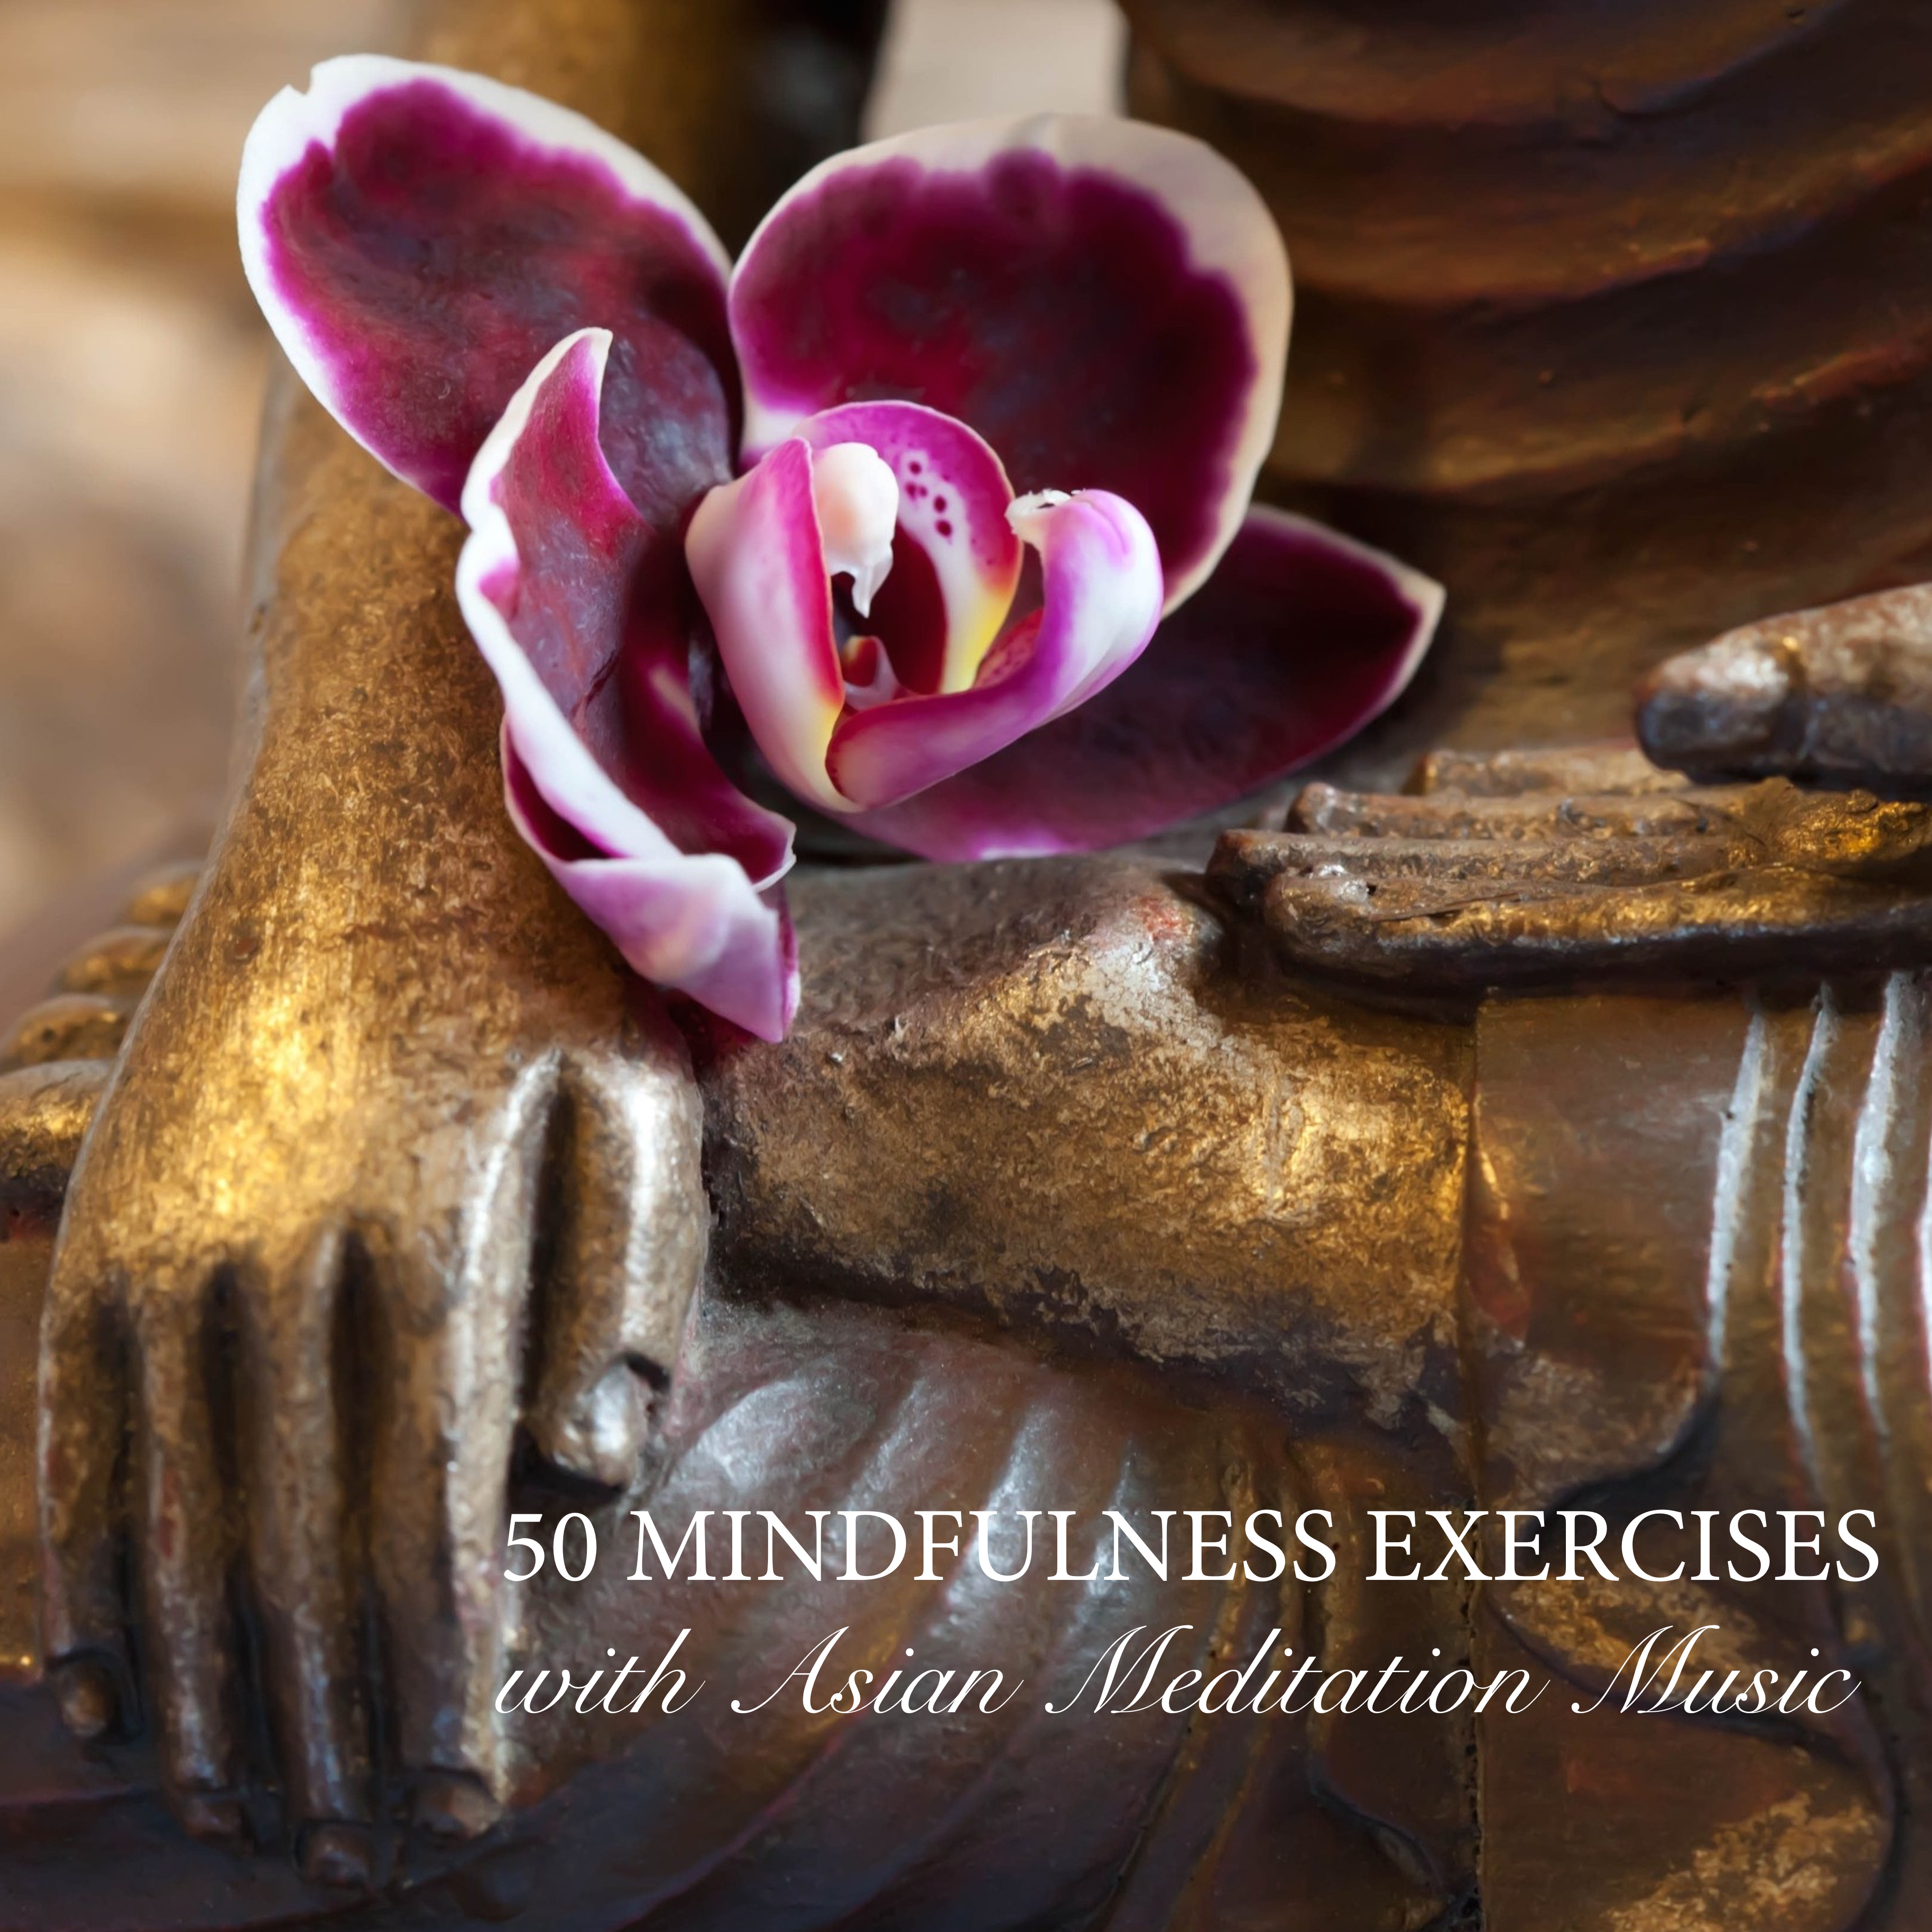 50 Mindfulness Exercises with Asian Meditation Music - Relaxing Songs and Zen Meditation Music for Purity, Spirituality & Serenity